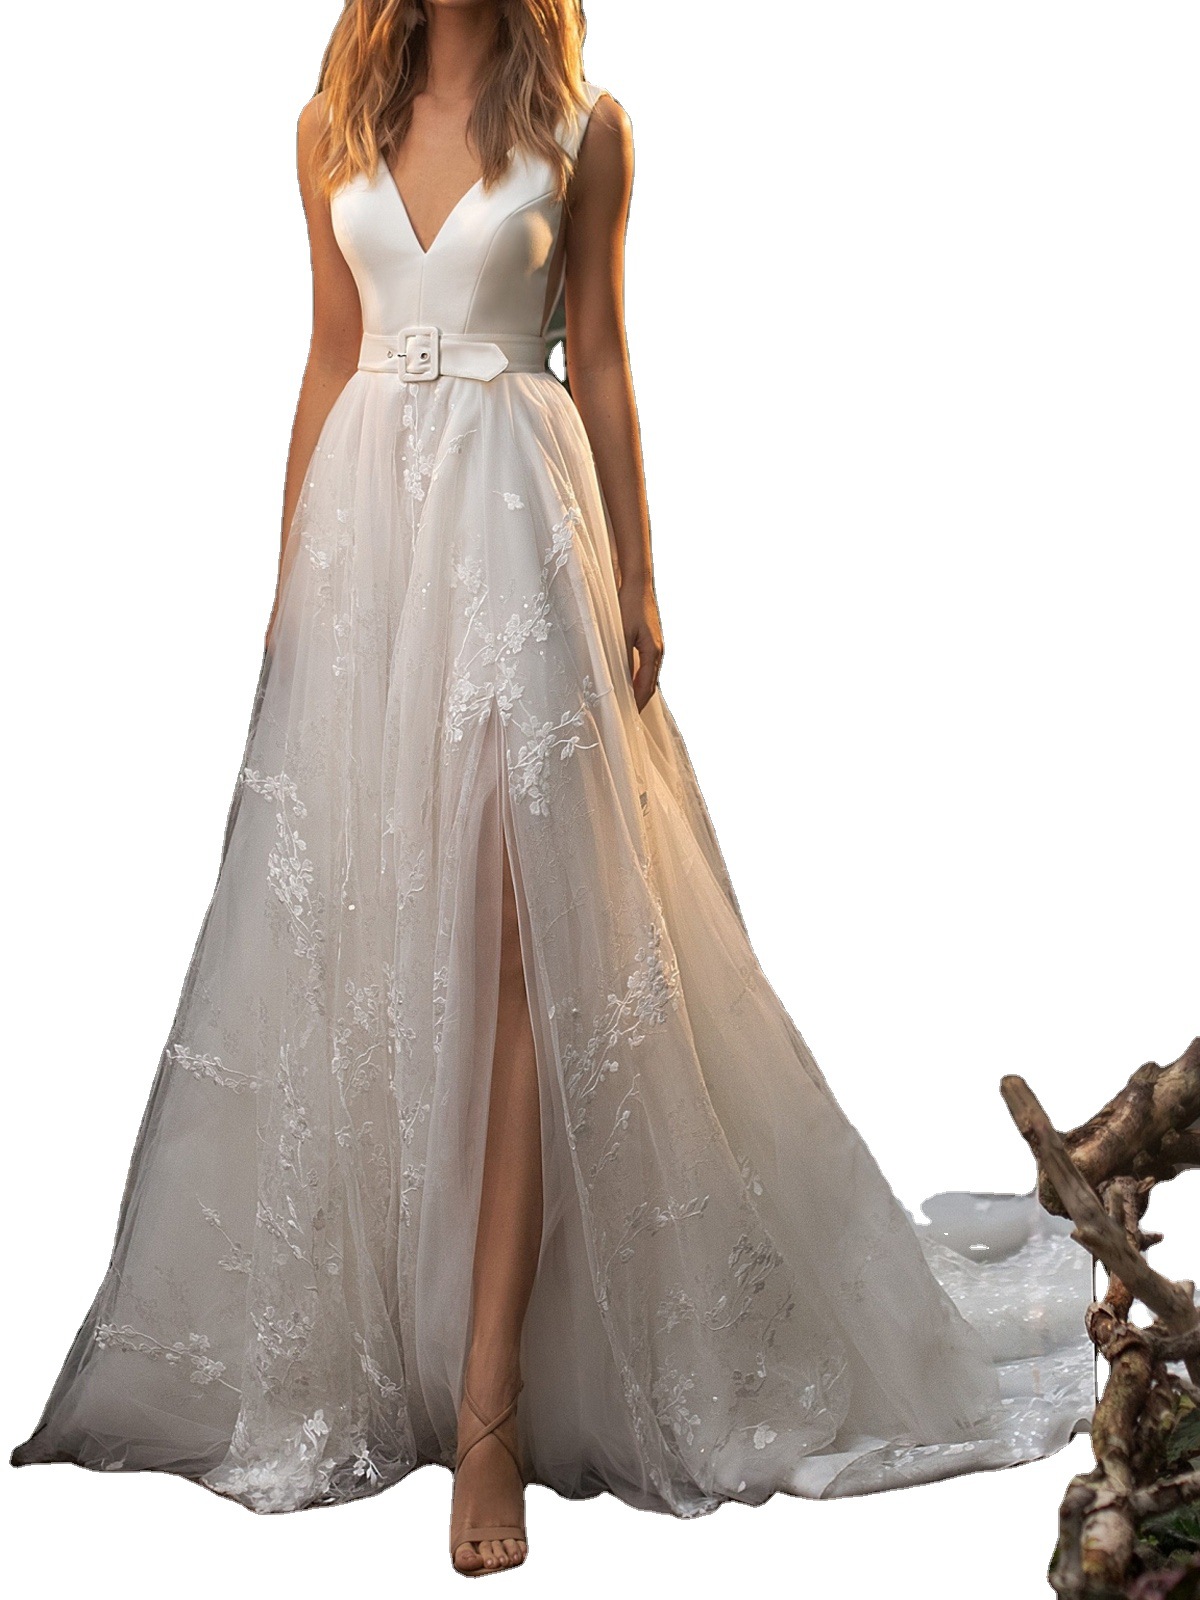 White Wedding Dress Floor Length Bridal Gown Satin & Lace Floor Length Formal Gown